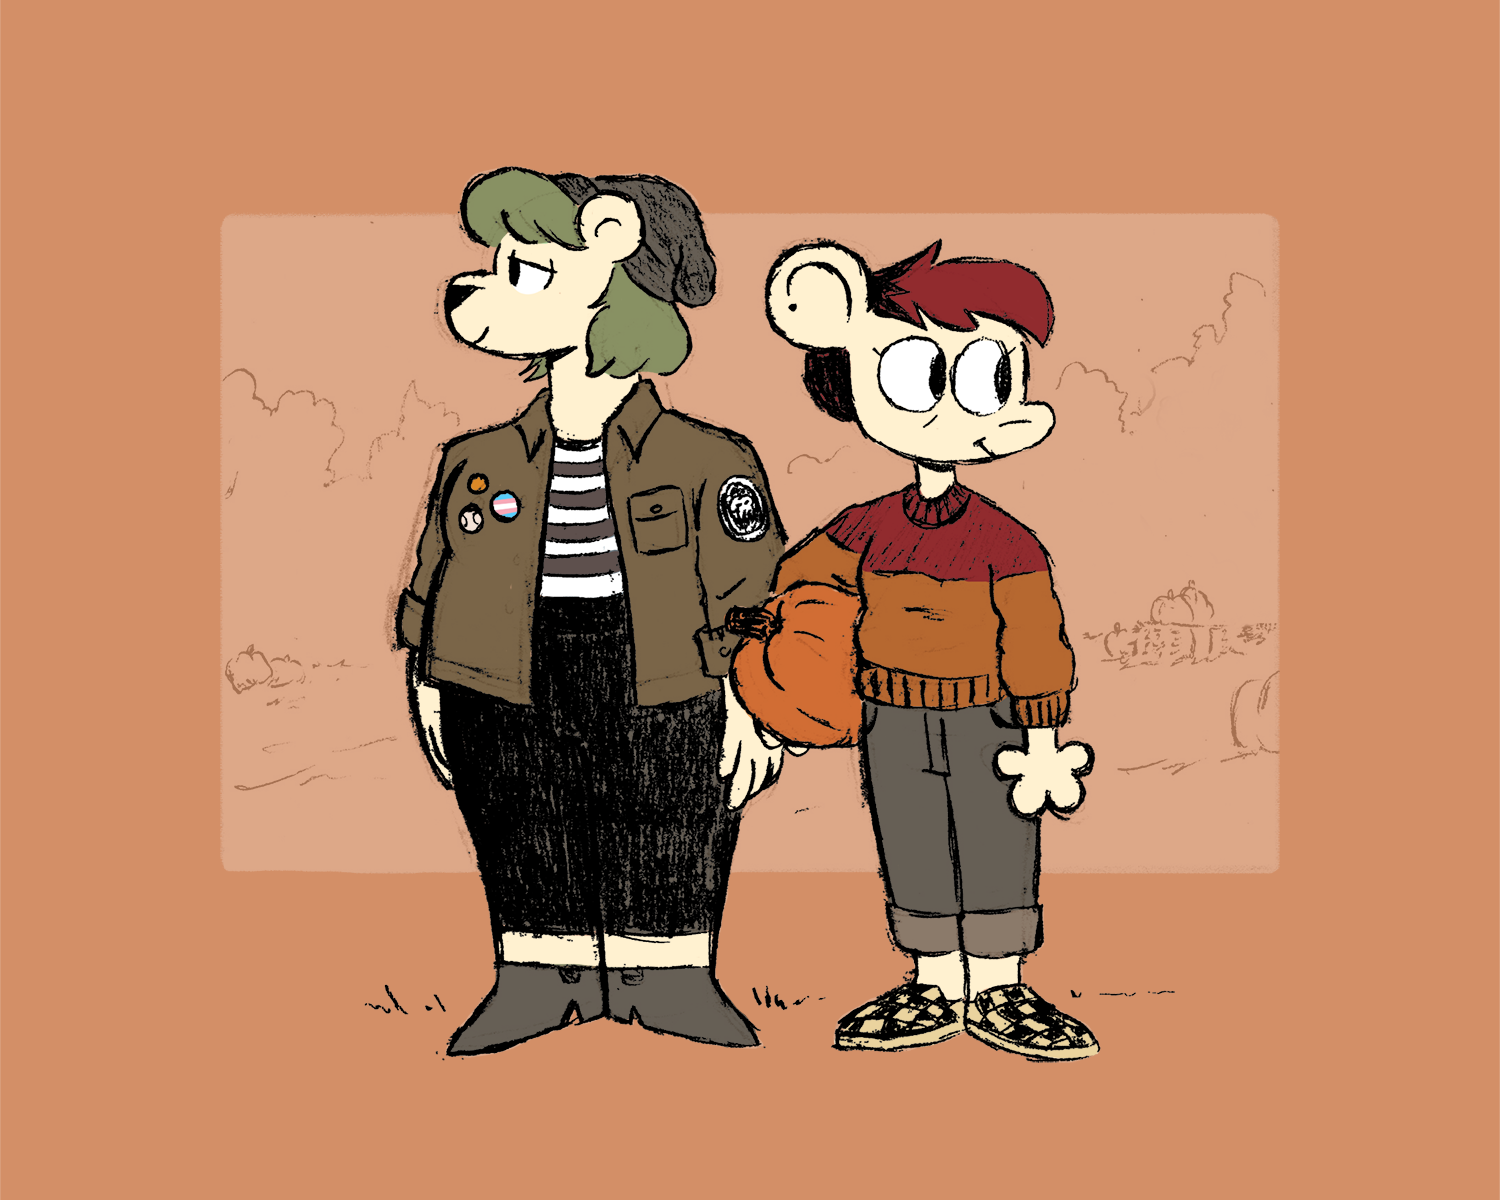 A drawing of Summer and Autumn from Nothing Doing wearing fall-weather outfits. Summer is wearing a grey beanie, a greenish-grey jacket with a skull patch, trans pride flag button and two other buttons, a striped shirt, black leggings, and grey boots. Autumn is wearing a red and orange sweater, grey jeans, and checkered slip-on shoes. She's also holding a pumpkin under her arm.